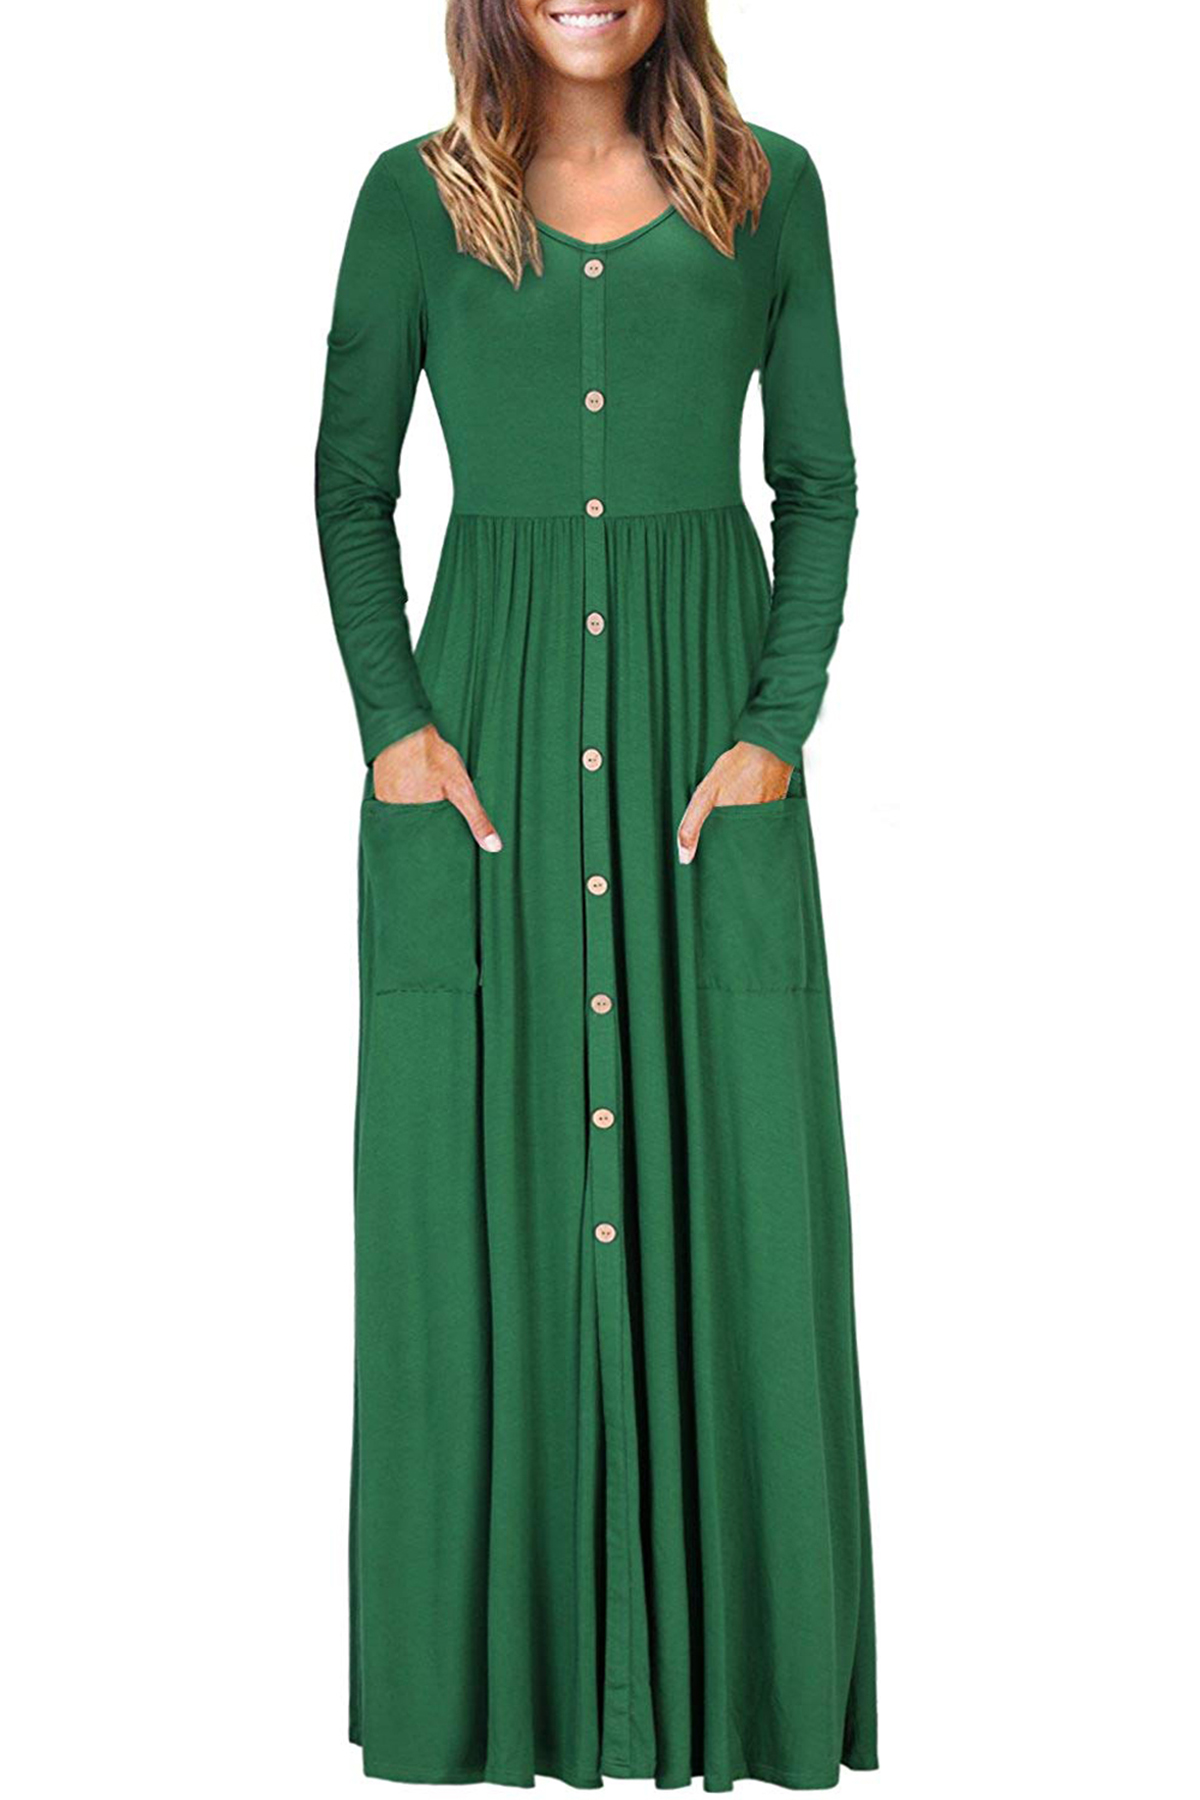 BY610503-9 Hunter  Button Front Pocket Style Casual Long Dress